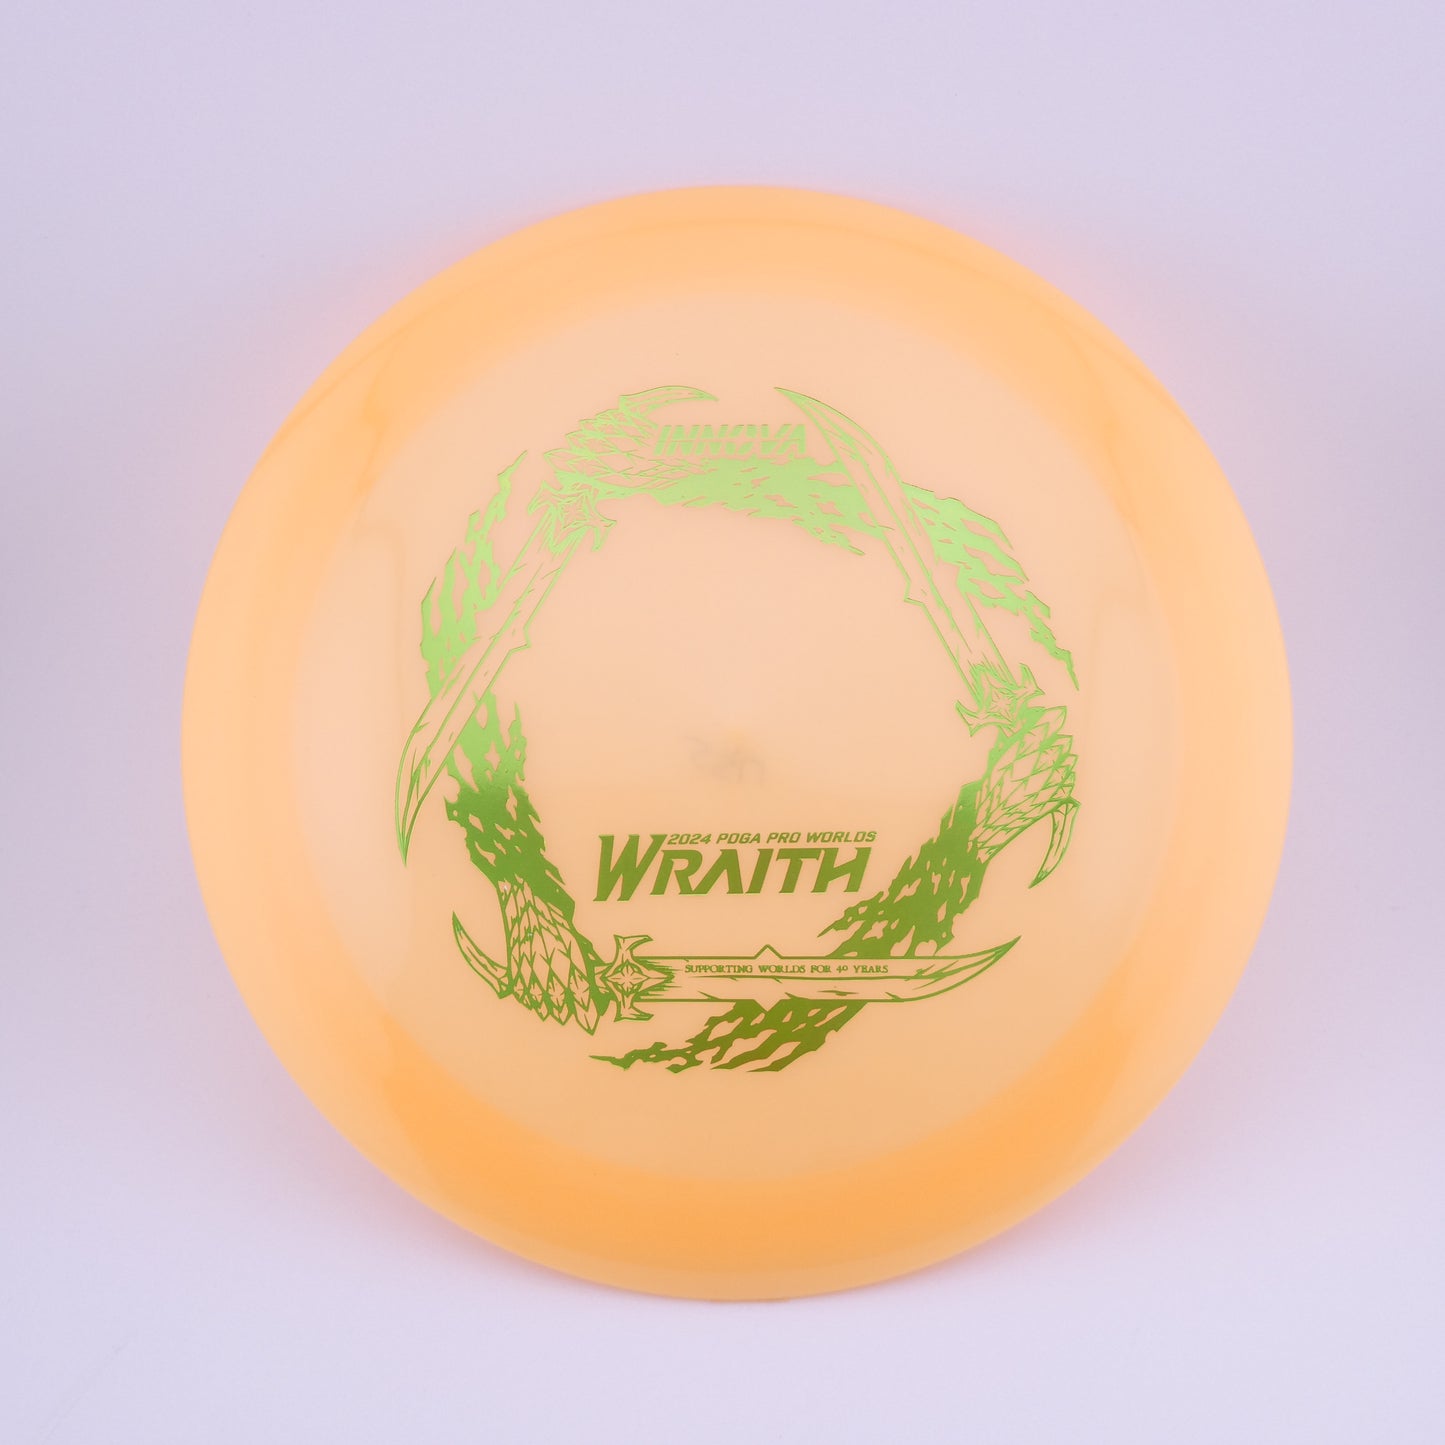 PDGA Worlds Champ Classic Color Glow Wraith